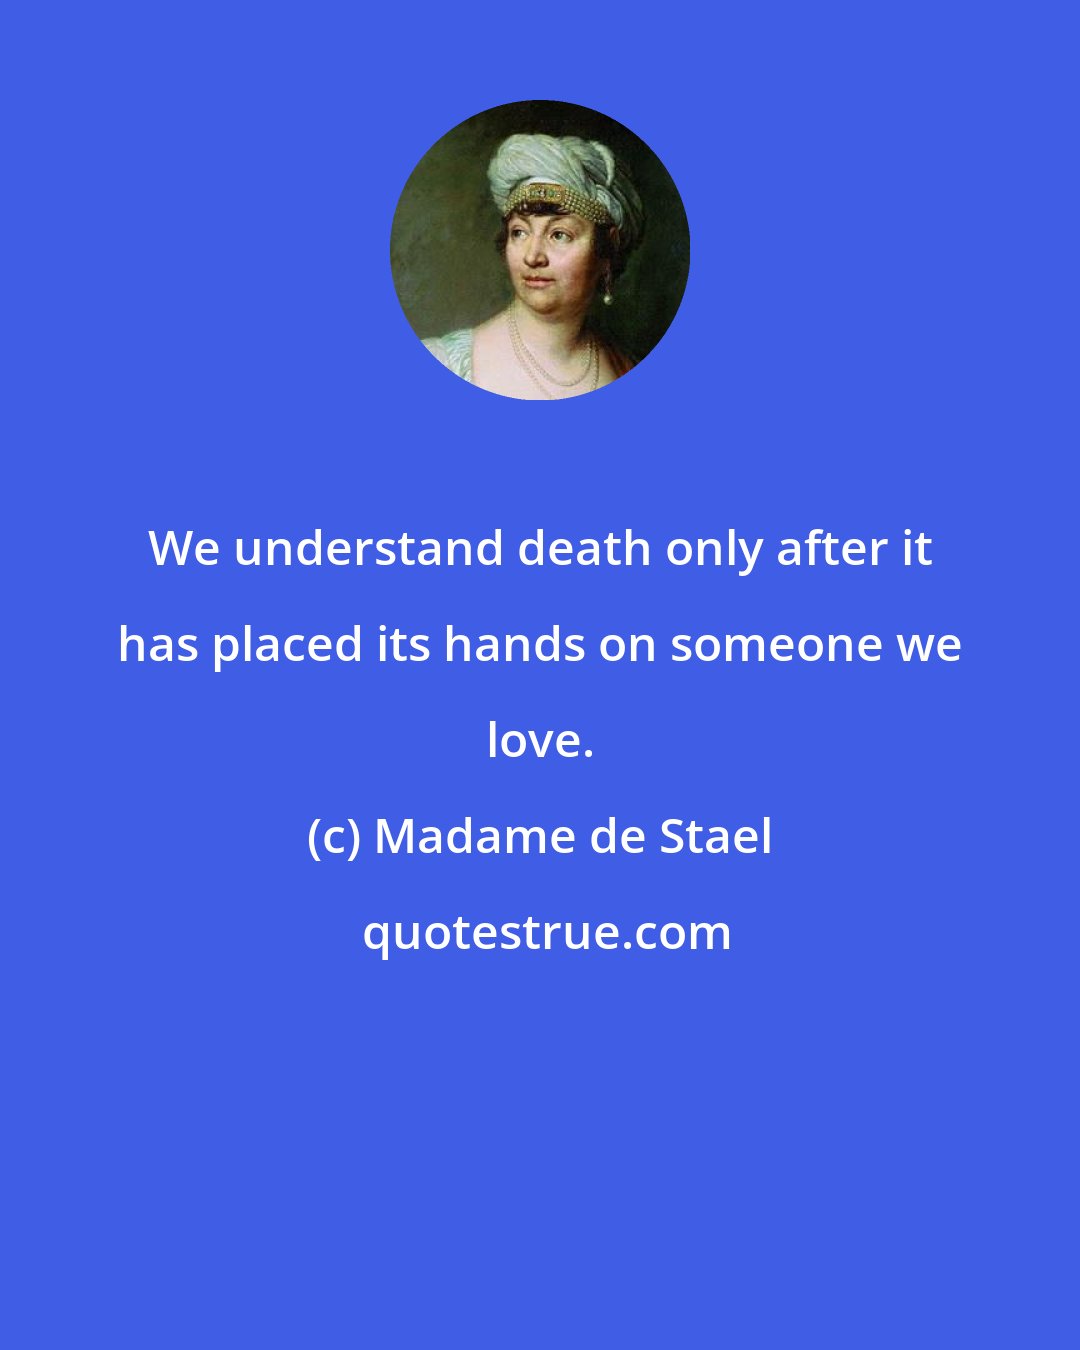 Madame de Stael: We understand death only after it has placed its hands on someone we love.